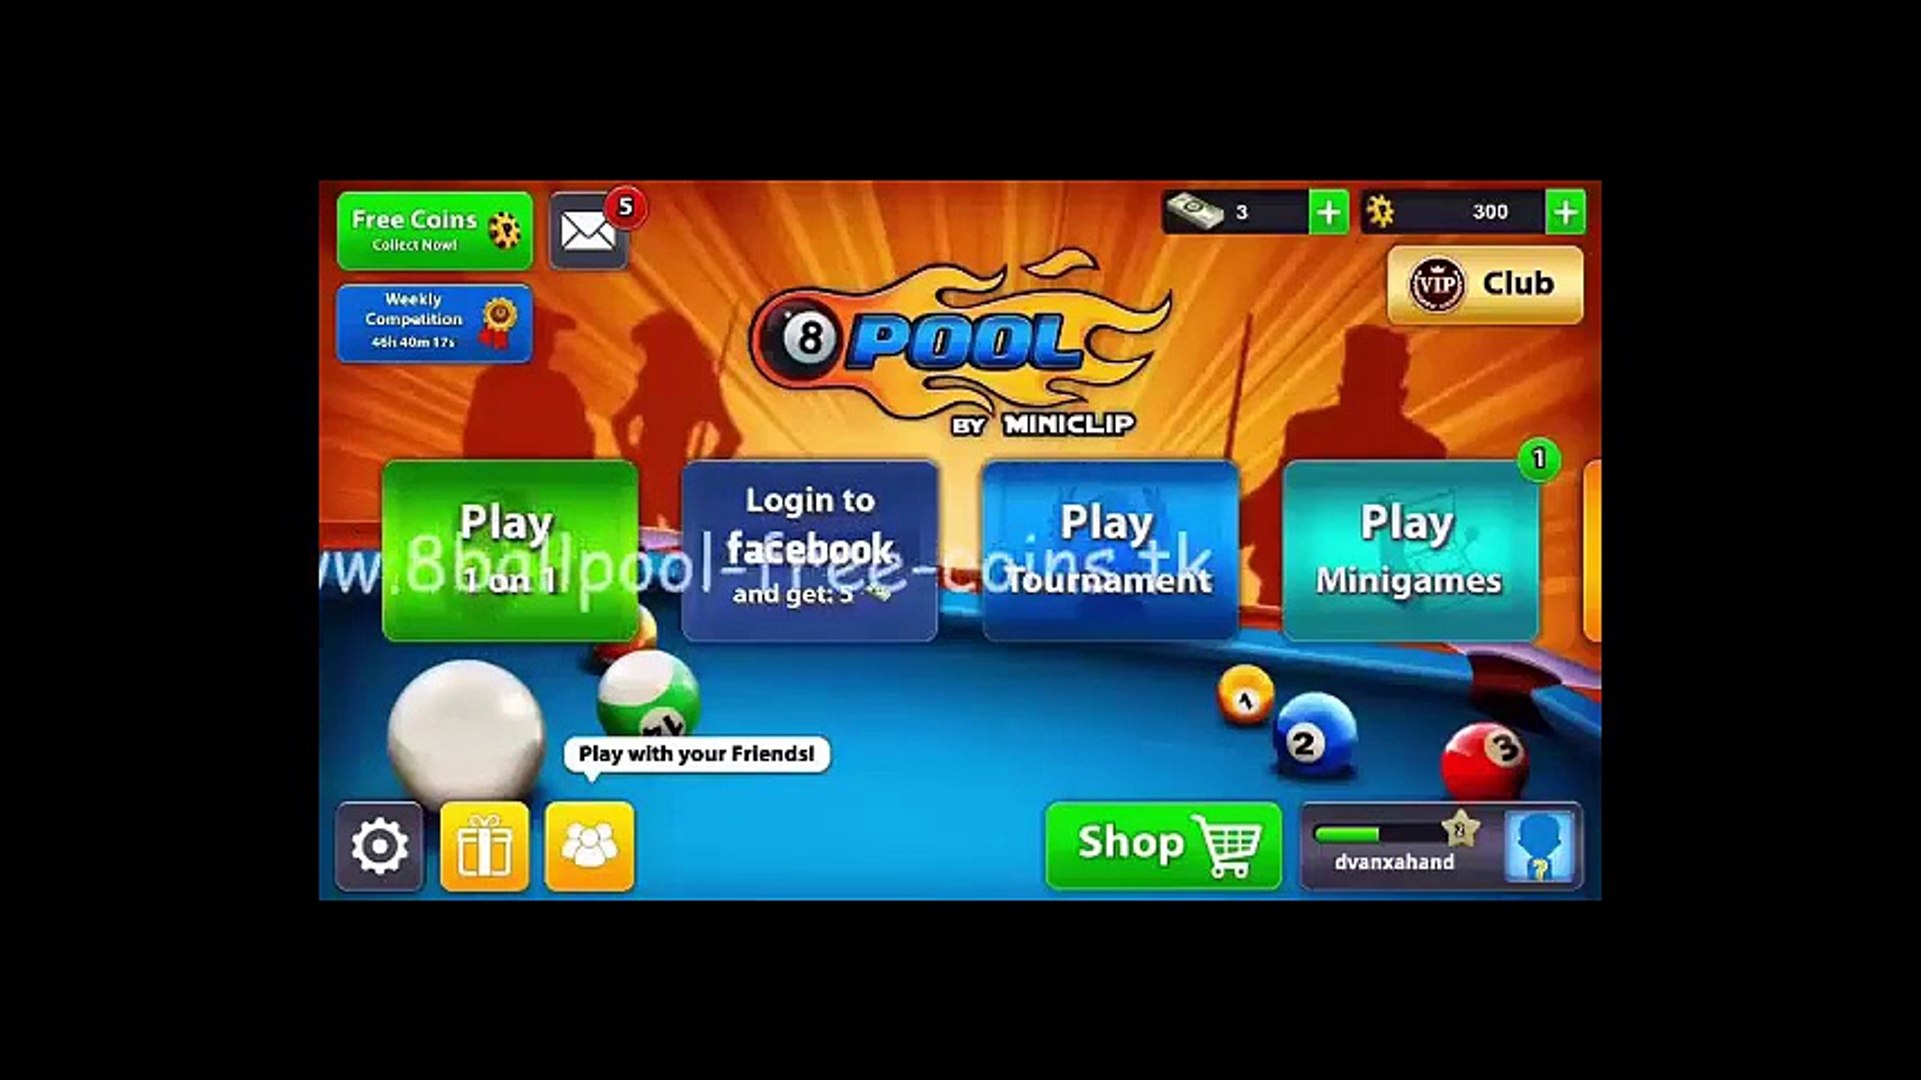 8 Ball Pool Coin trick 2017 Free coin ( 1000% ) - 